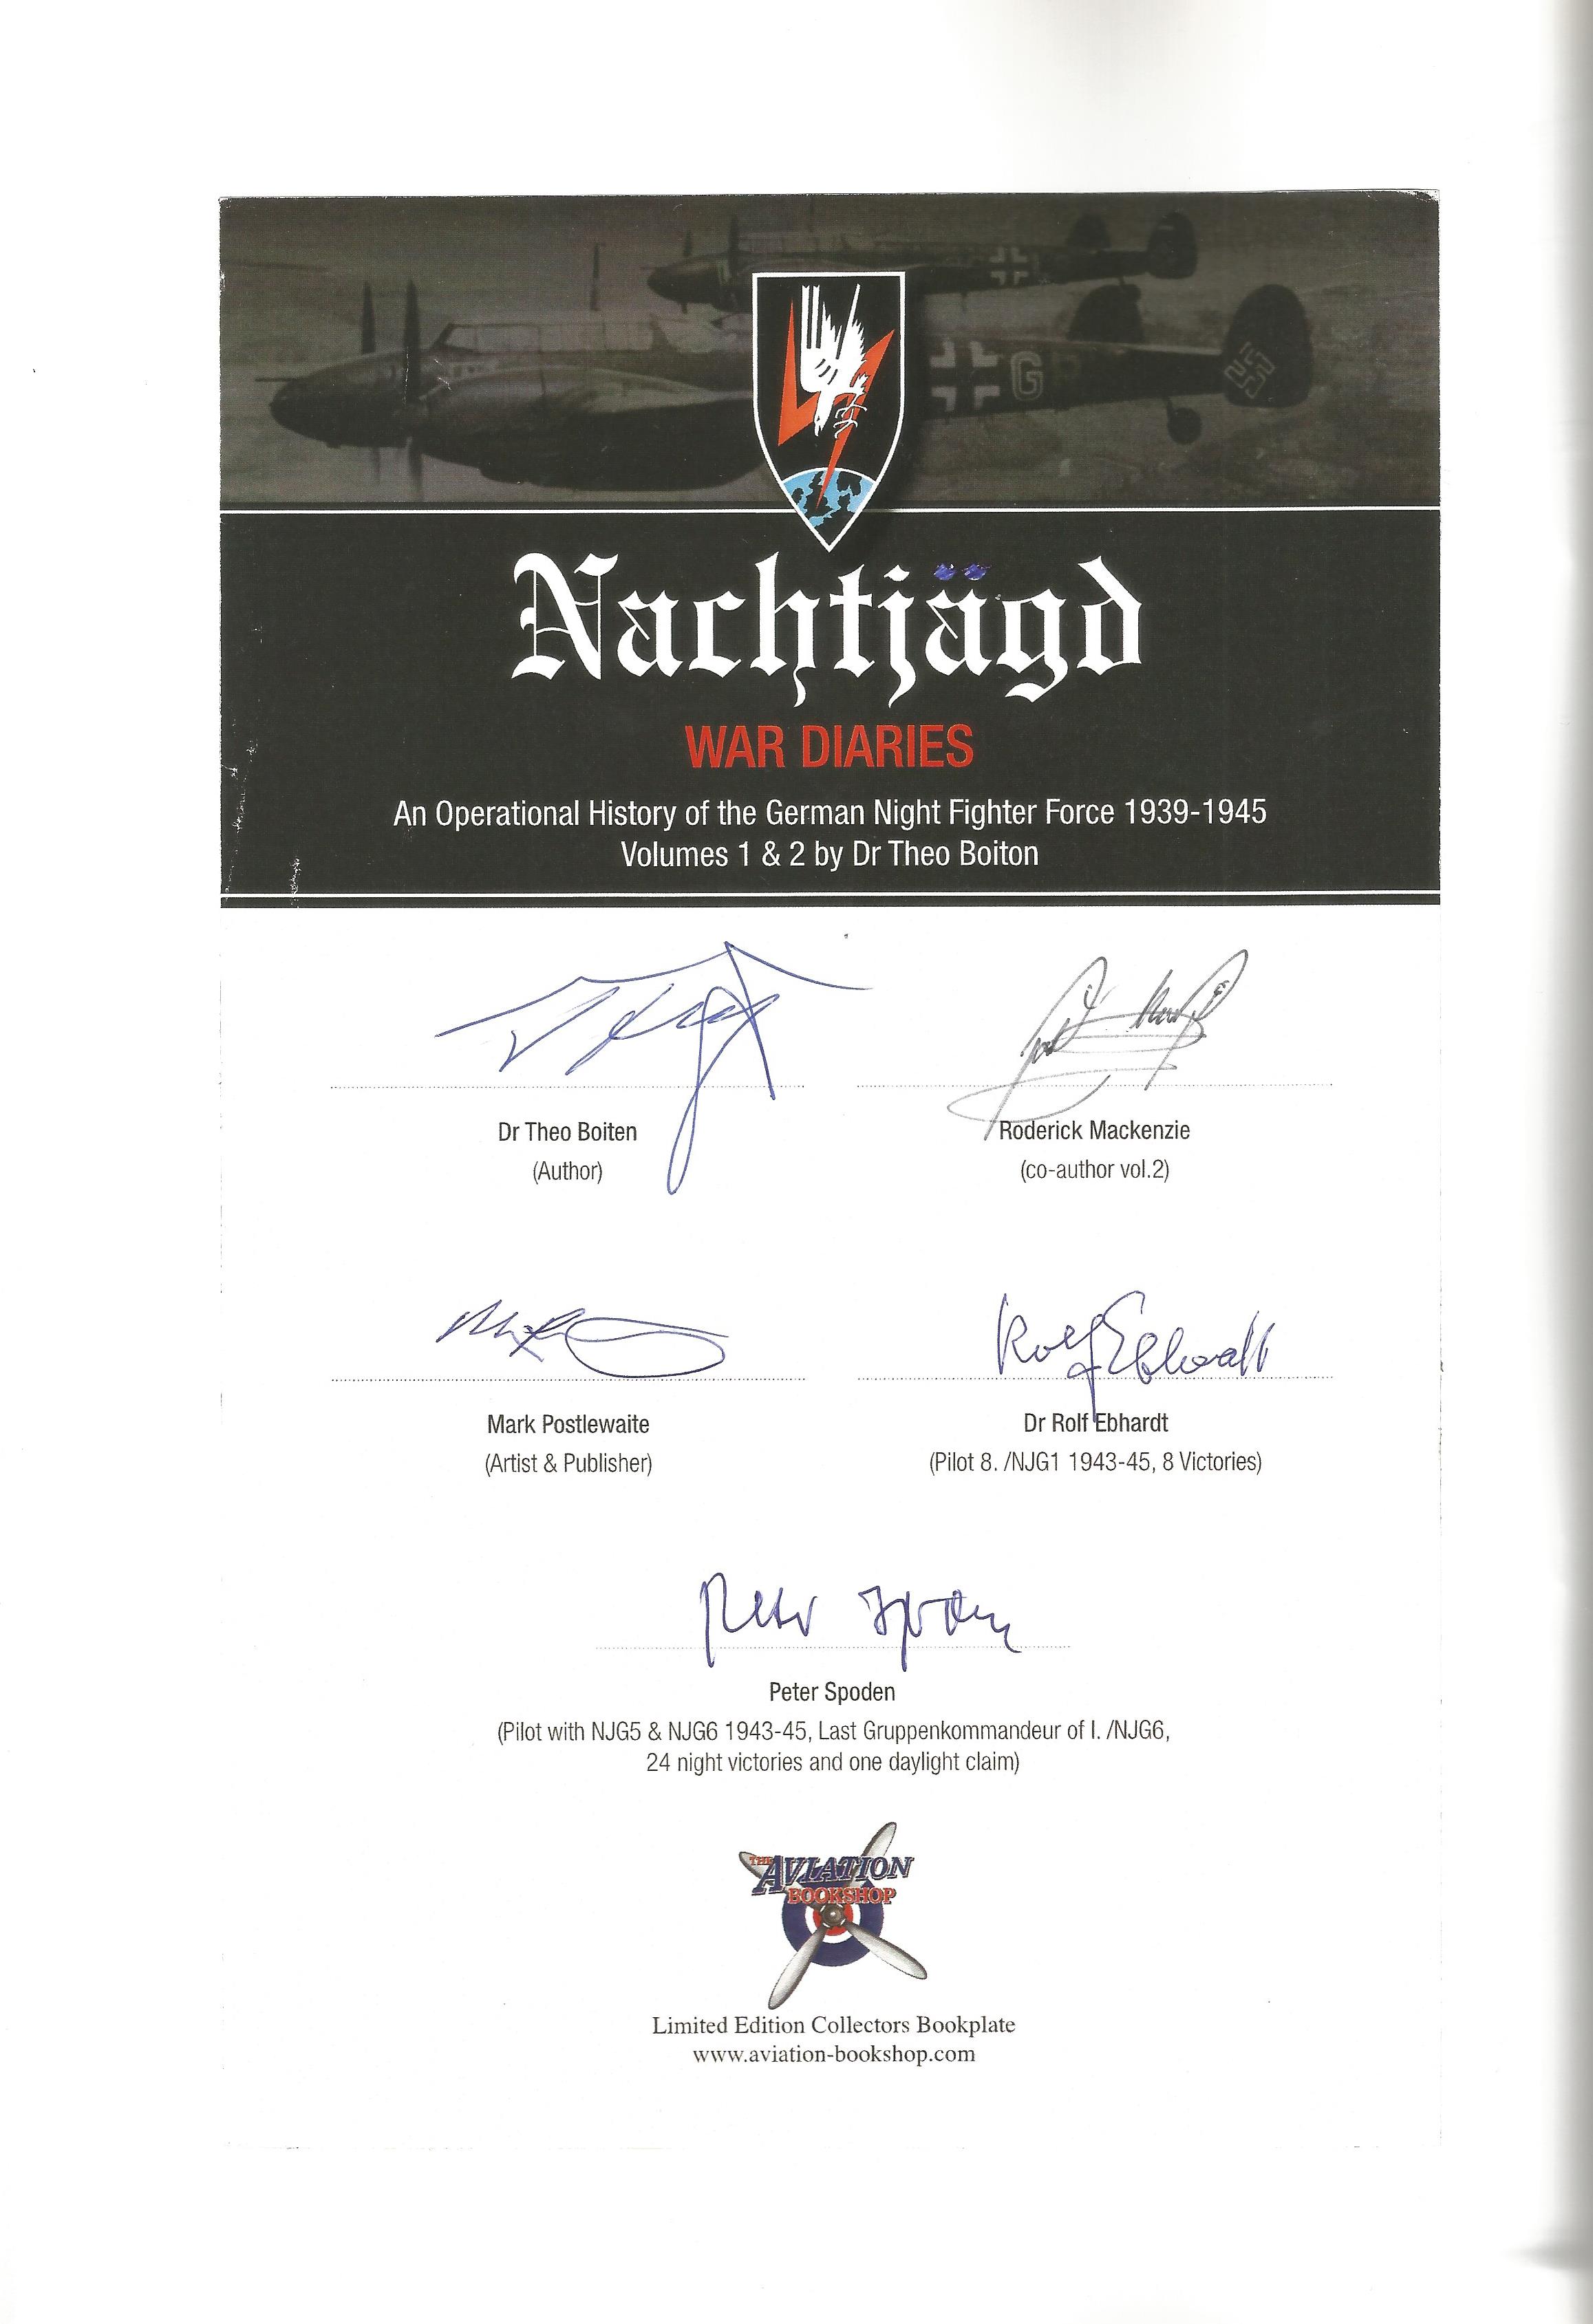 WWII multi signed Nachtjagd War Diaries Vol 1 An Operational History of the German Night Fighter - Image 2 of 4